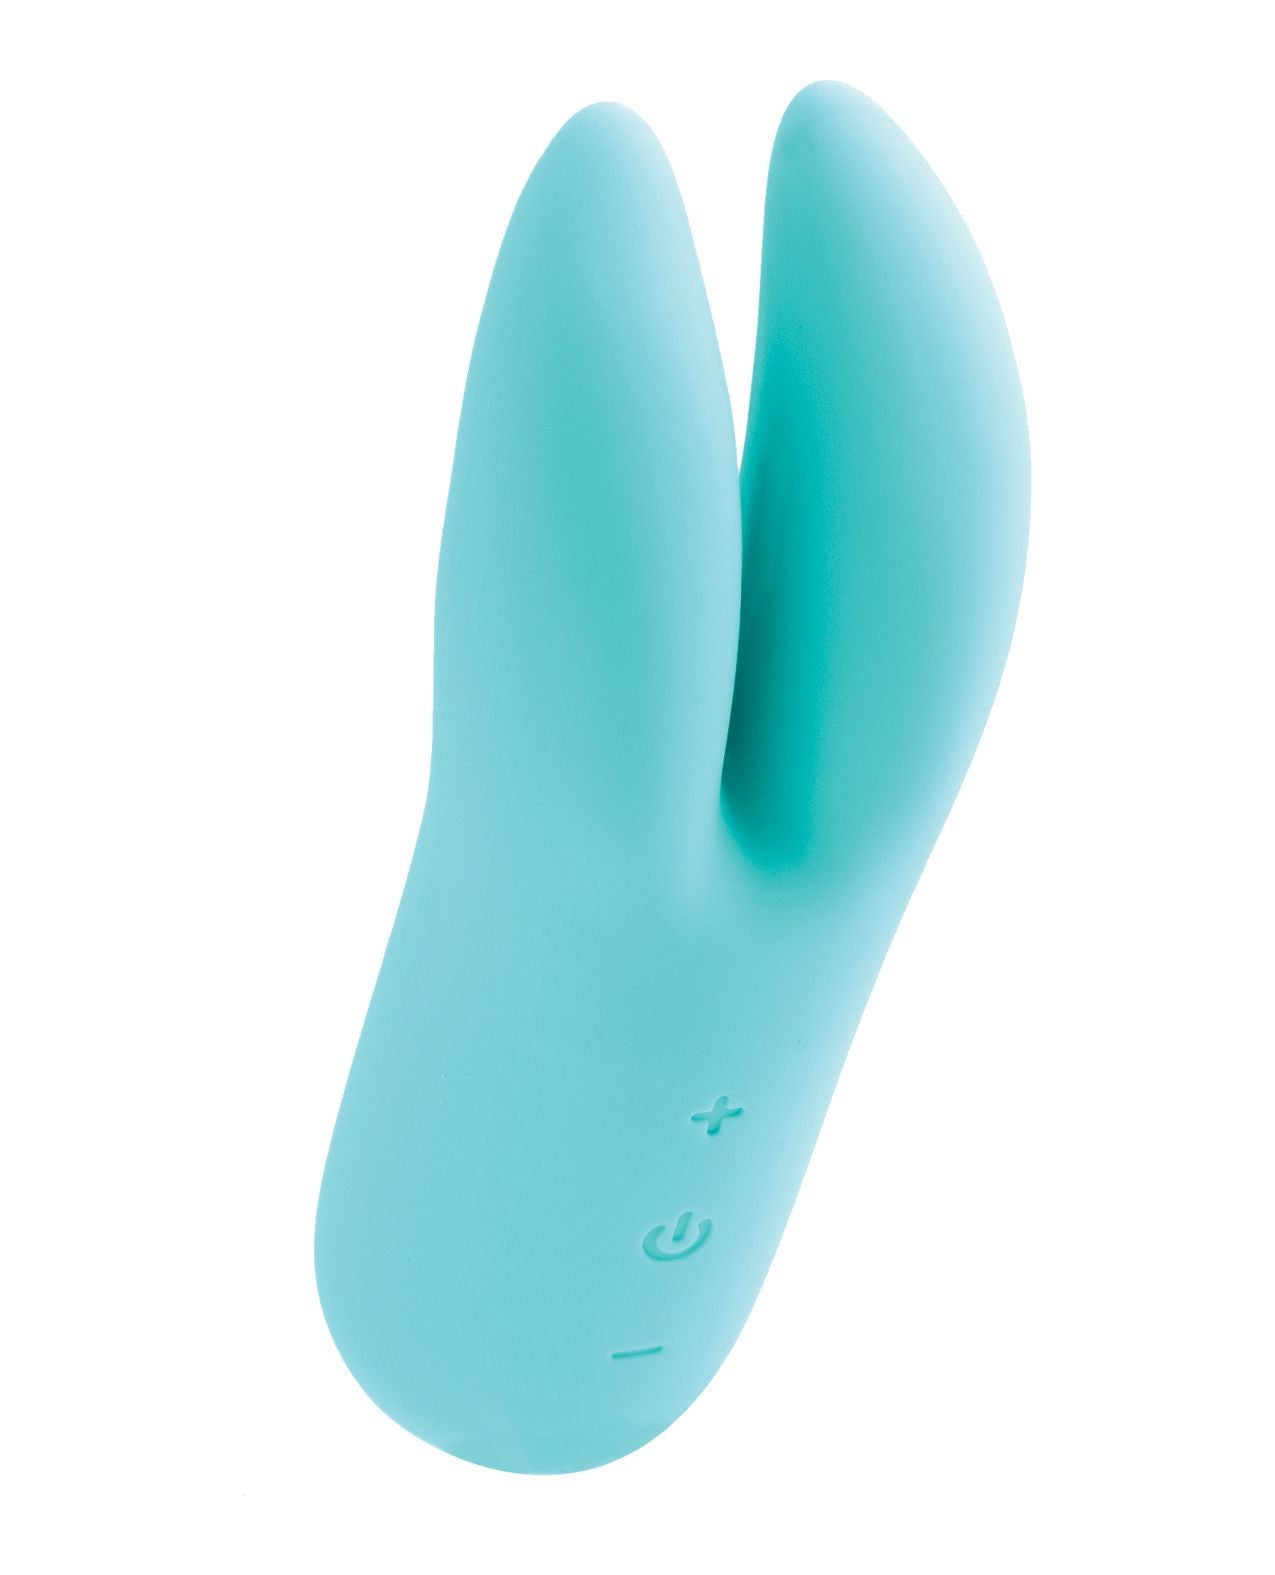 Back side angle view of the dual vibe showing the division in the 2 ears as well as the power and control buttons (turquoise).